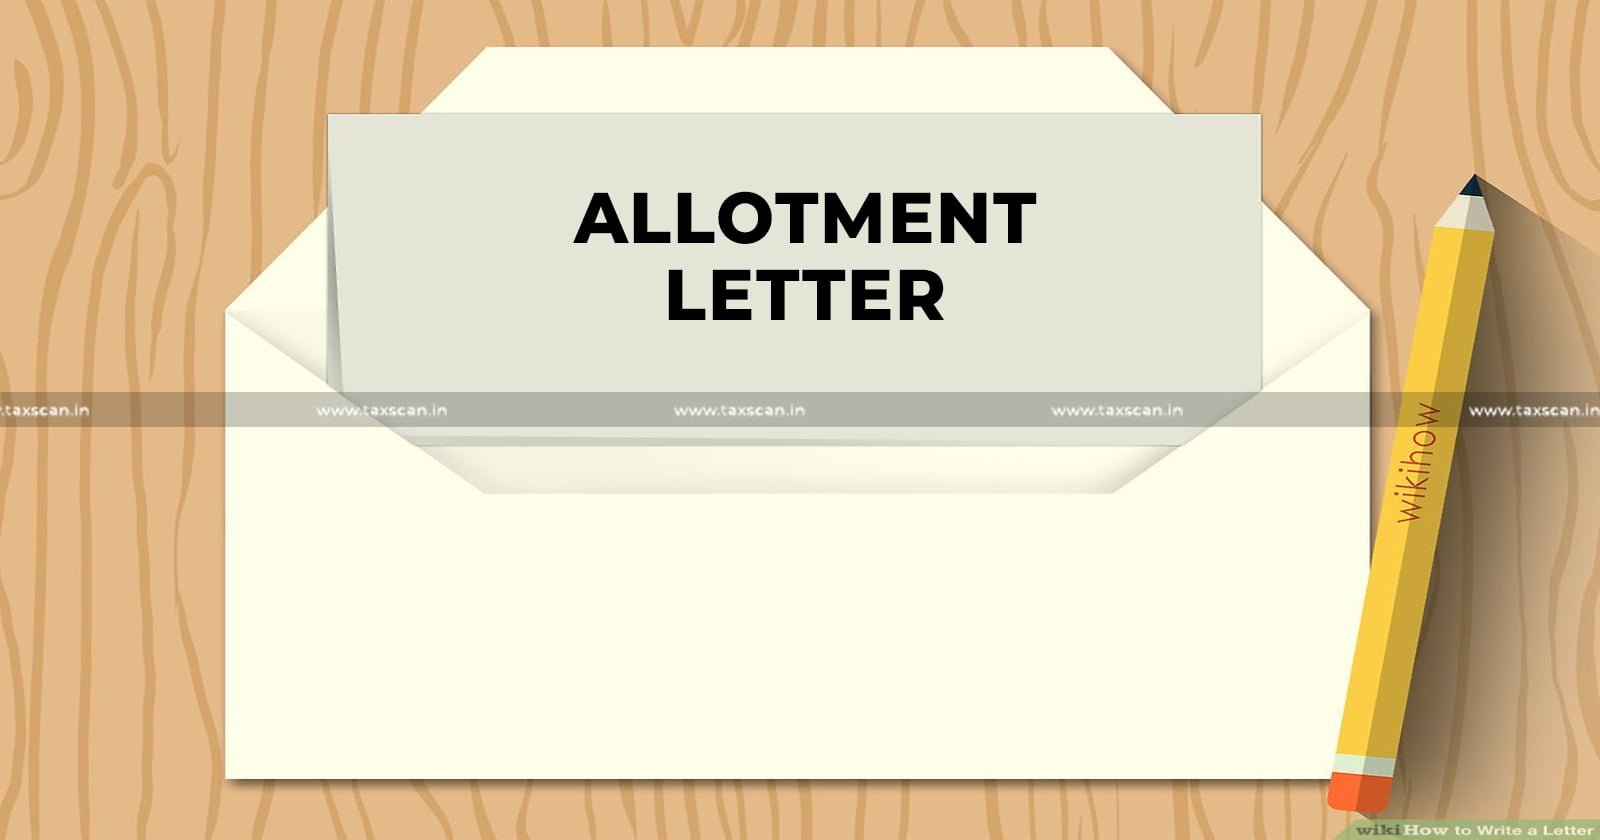 IT Act if allotment letter issued -purchase property in future - ITAT - TAXSCAN